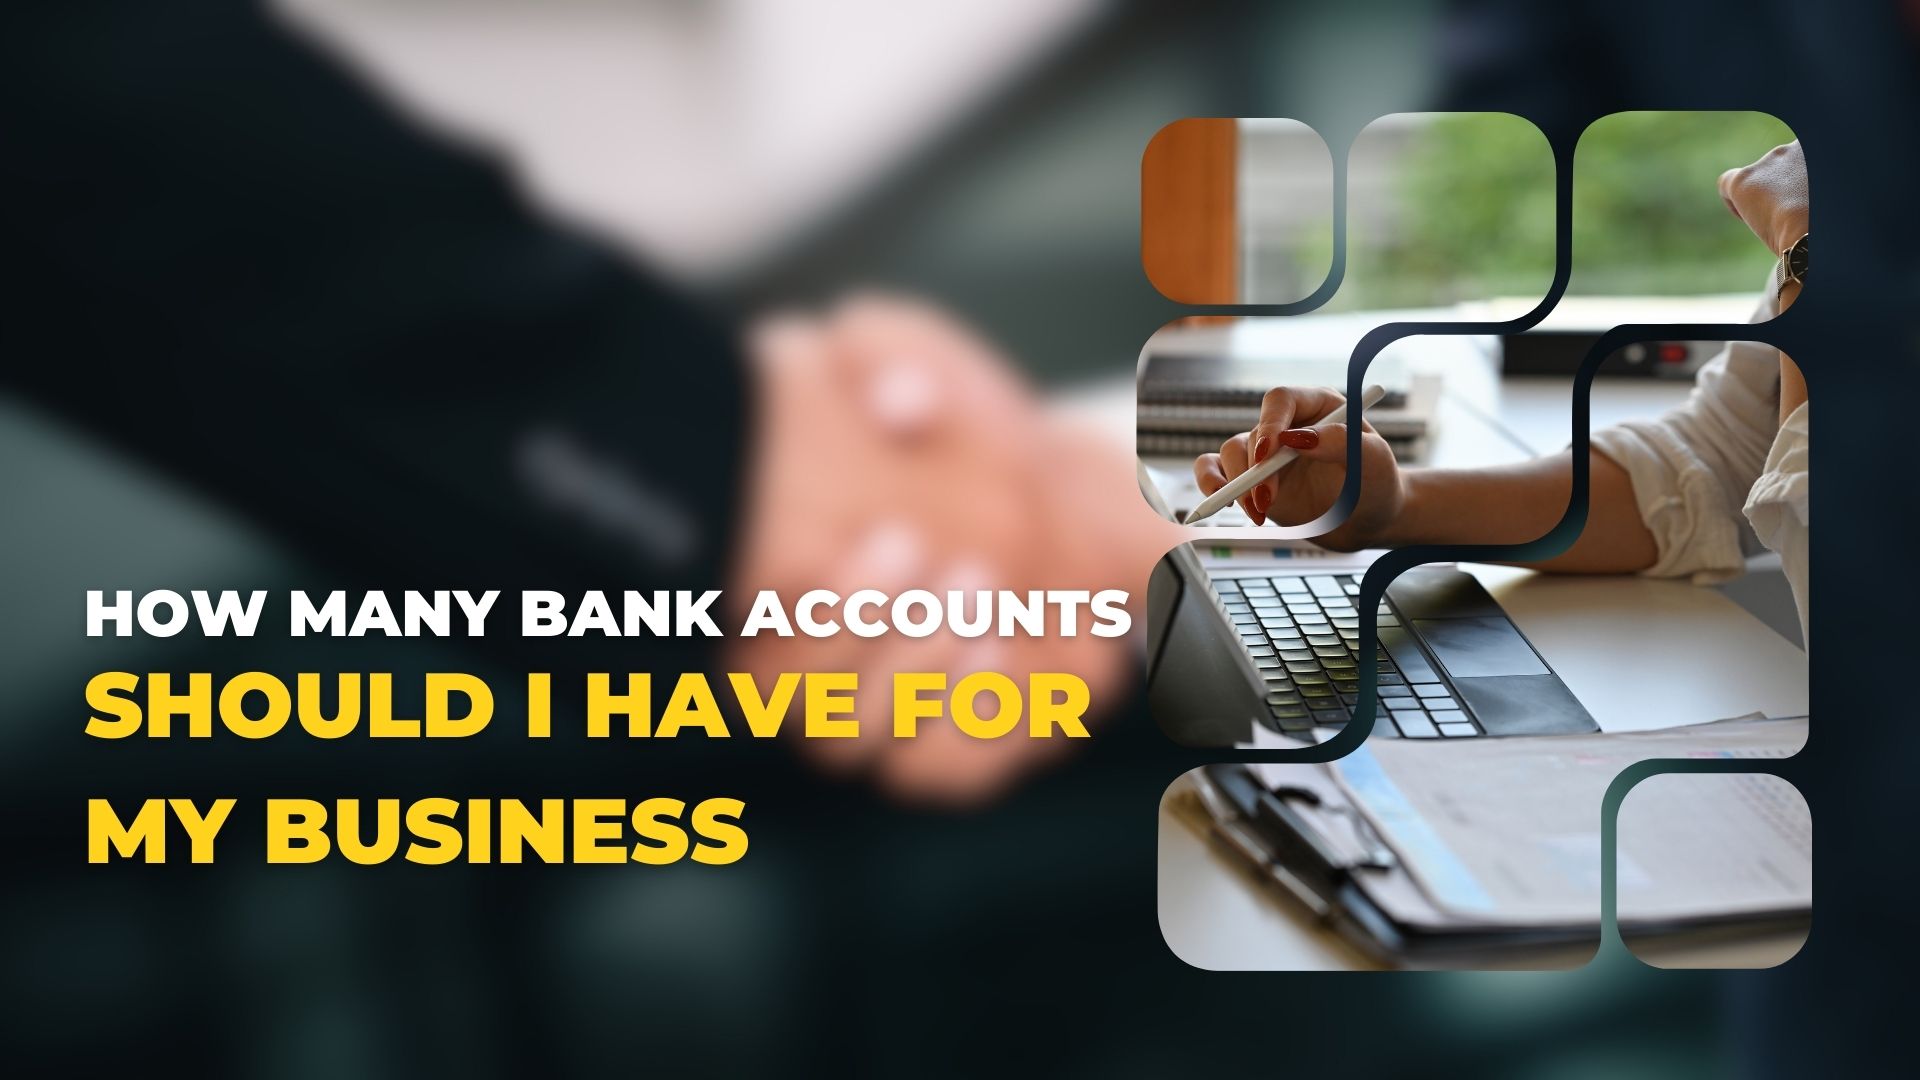 How Many Bank Accounts Should I Have for My Business